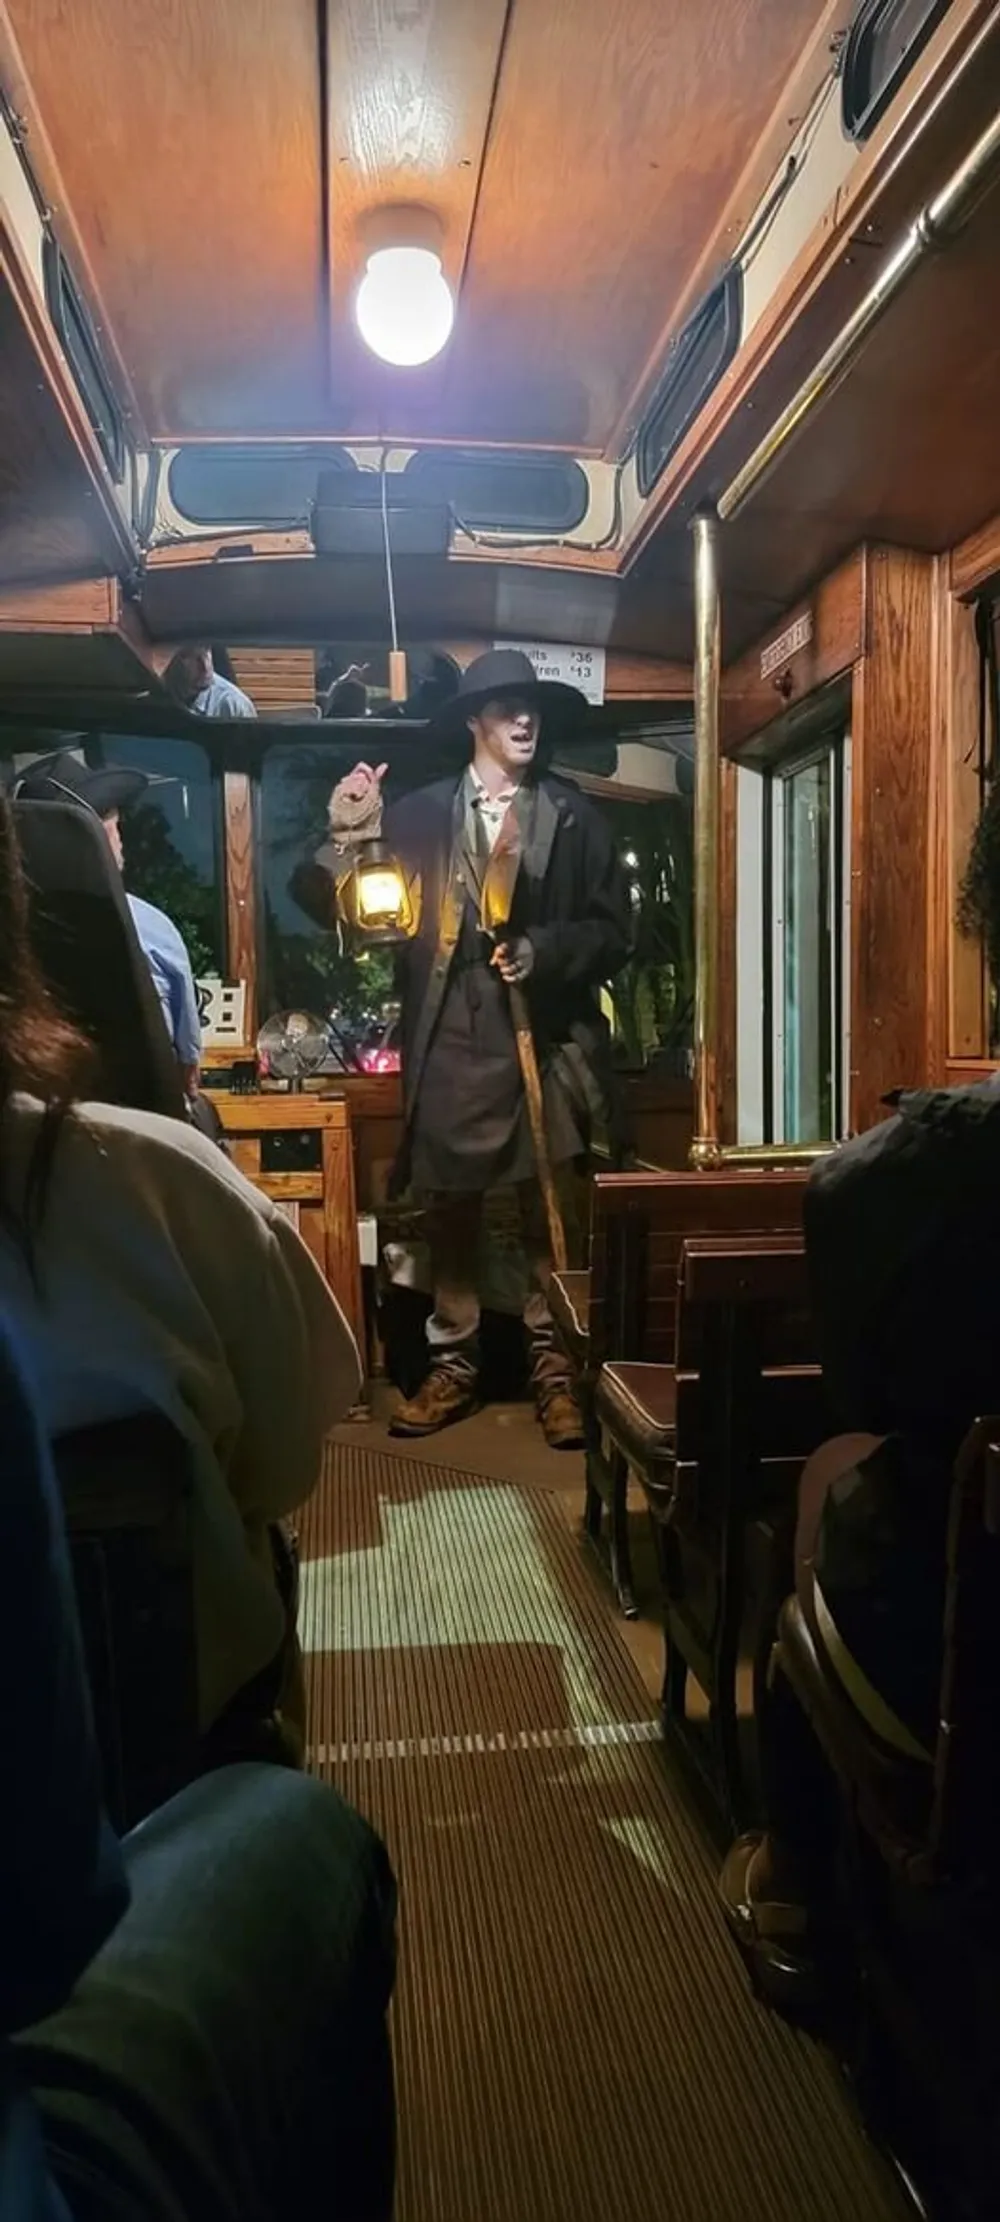 A person in a period costume holding a lantern stands inside a vintage train carriage seemingly addressing the passengers